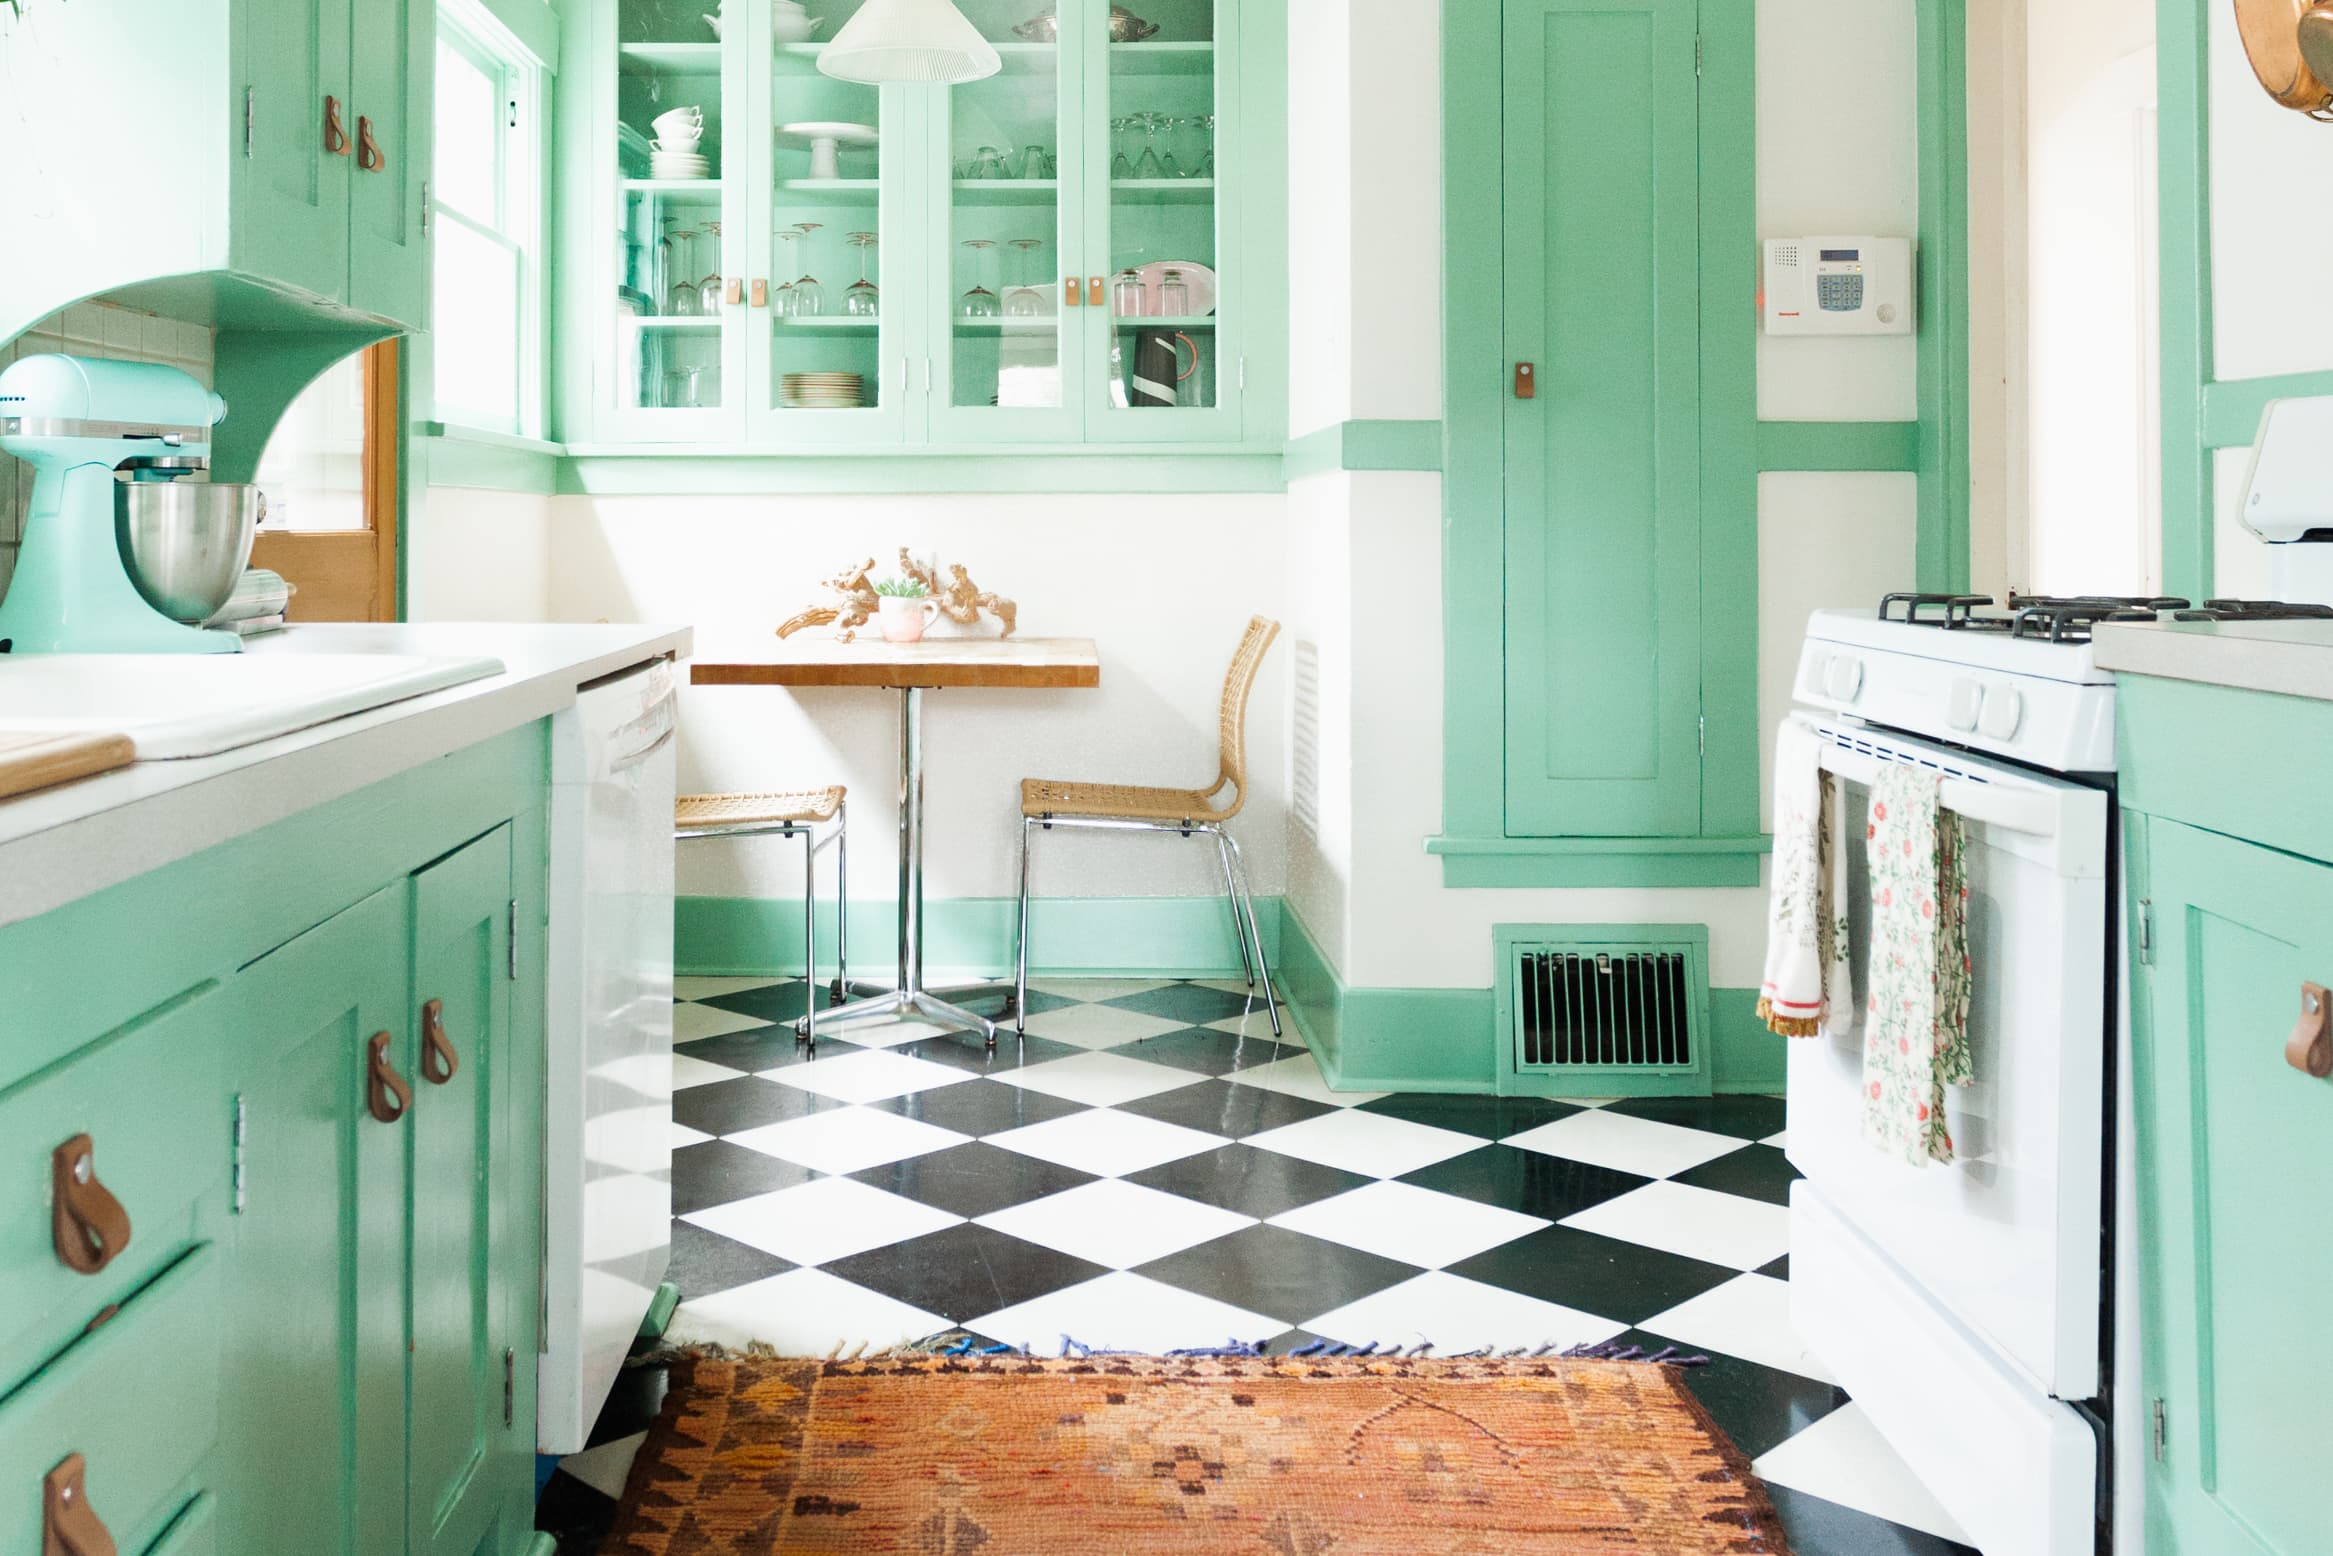 Three clever layouts to make the most of a small kitchen